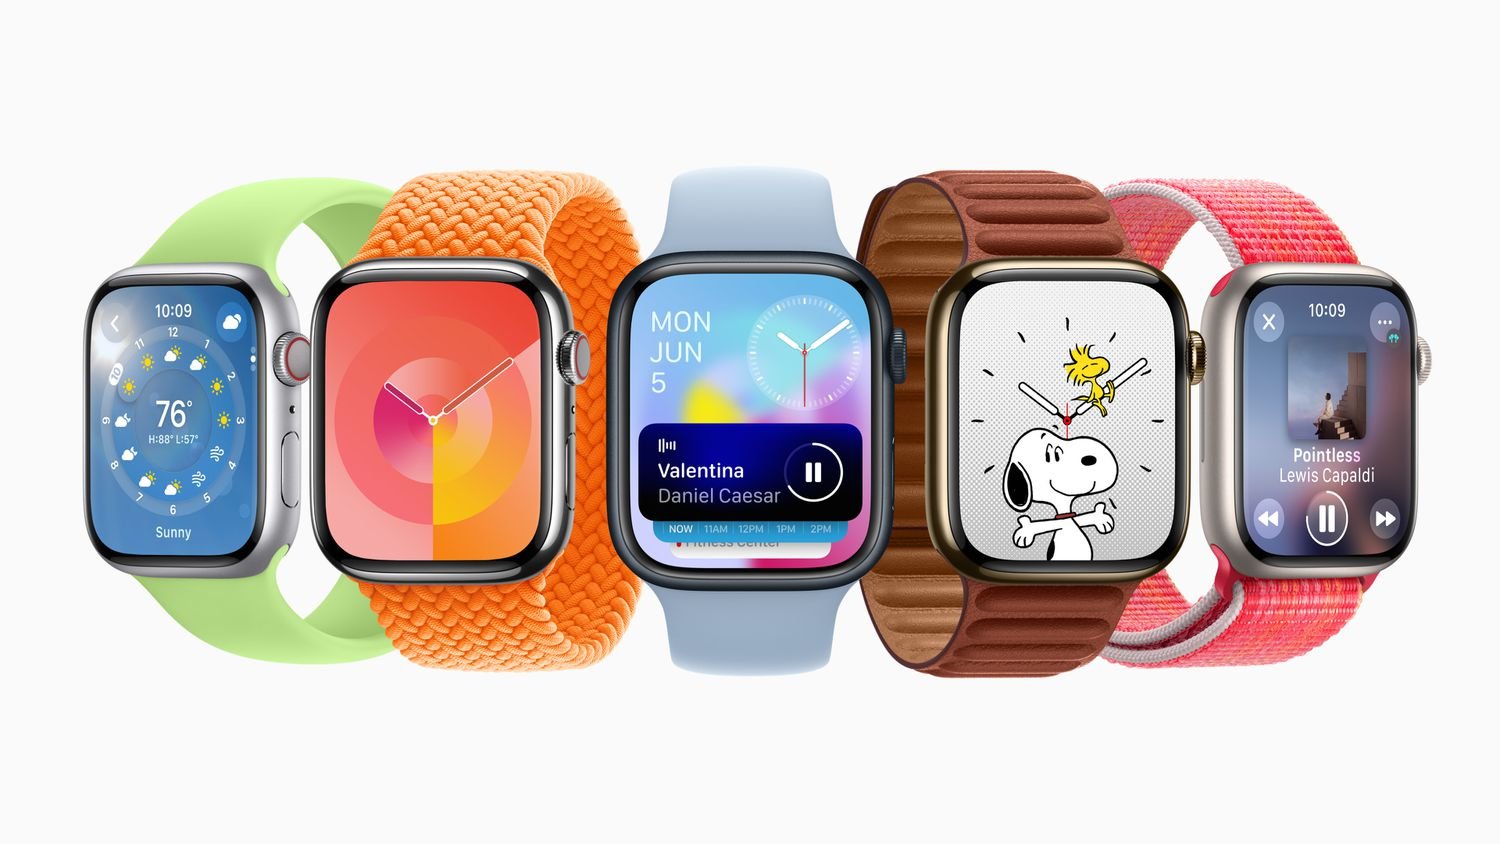 Making Apple Watch Work with Android